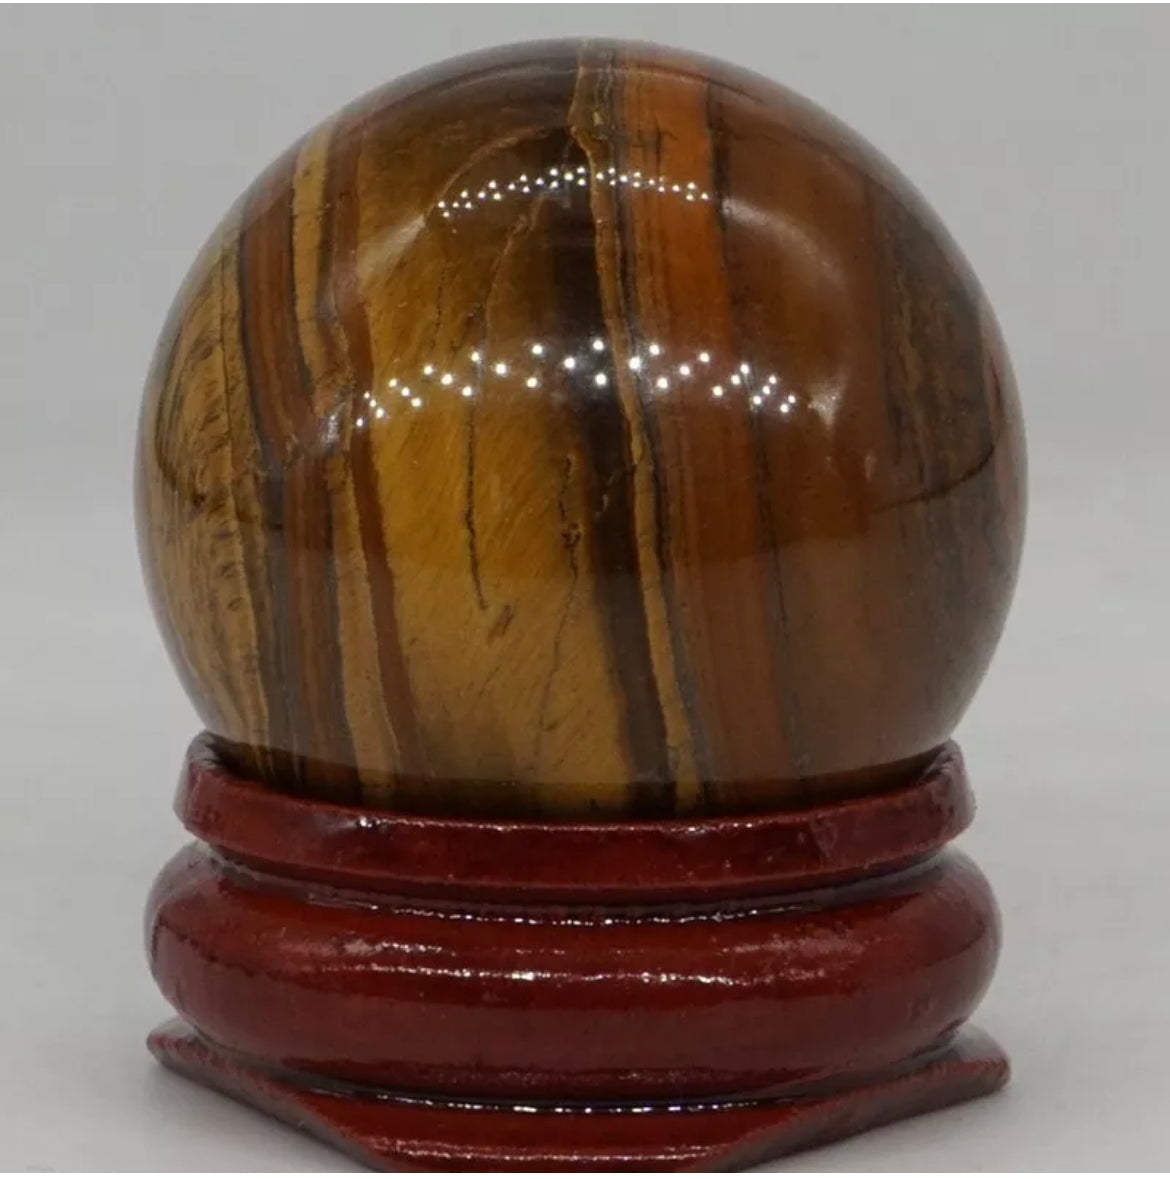 Natural Tiger Eye crystal gemstone semiprecious sphere with stand